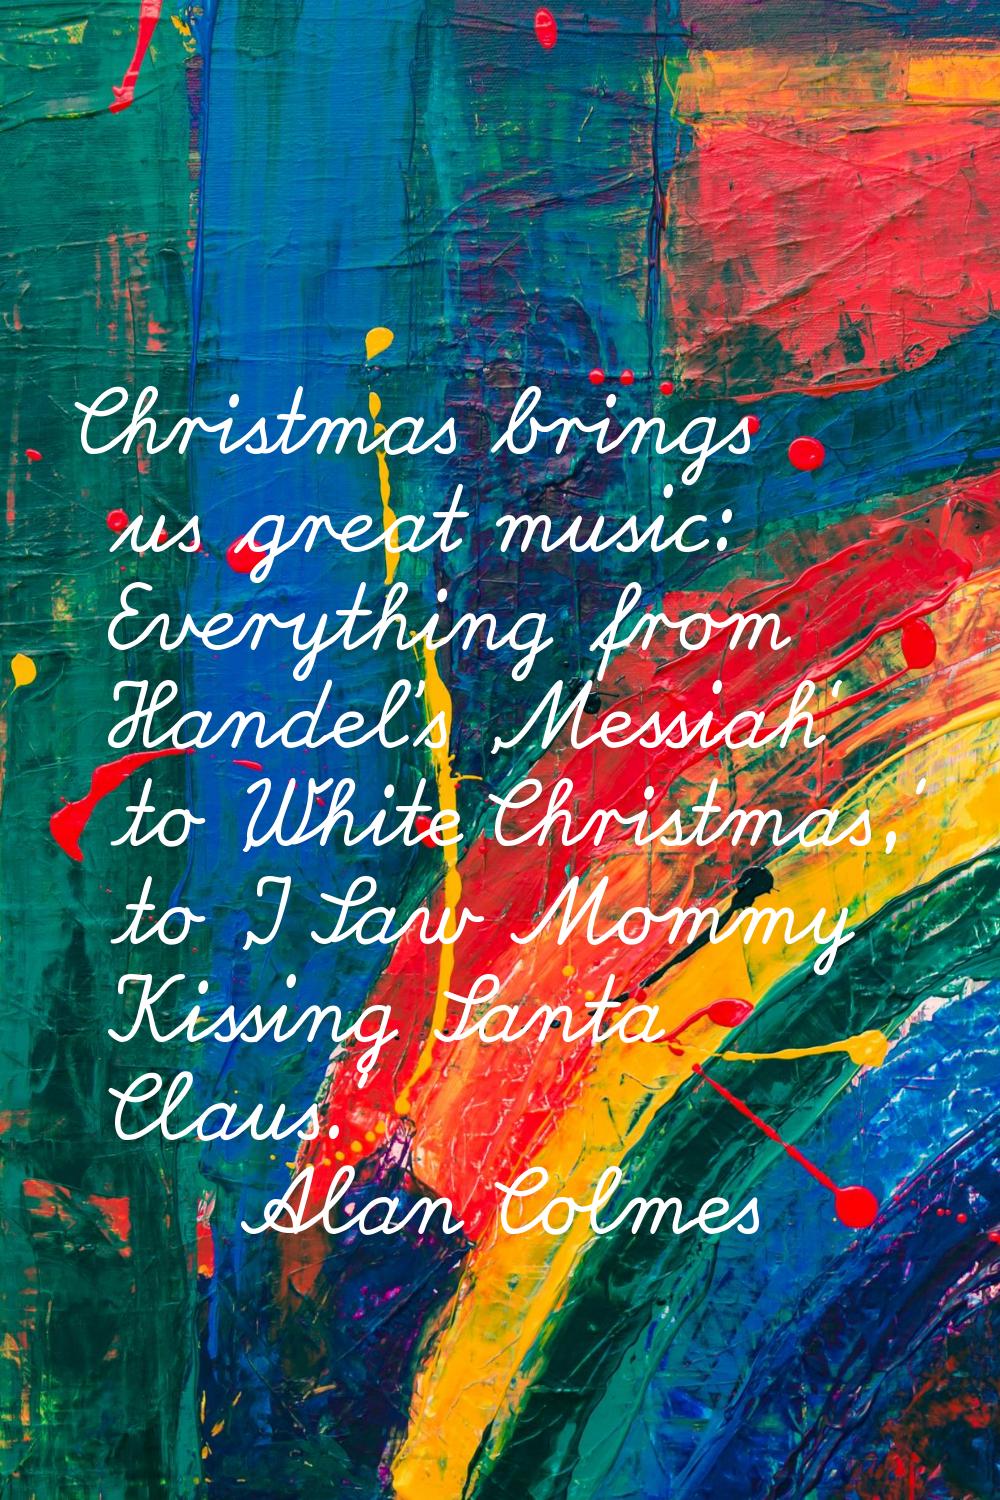 Christmas brings us great music: Everything from Handel's 'Messiah' to 'White Christmas,' to 'I Saw